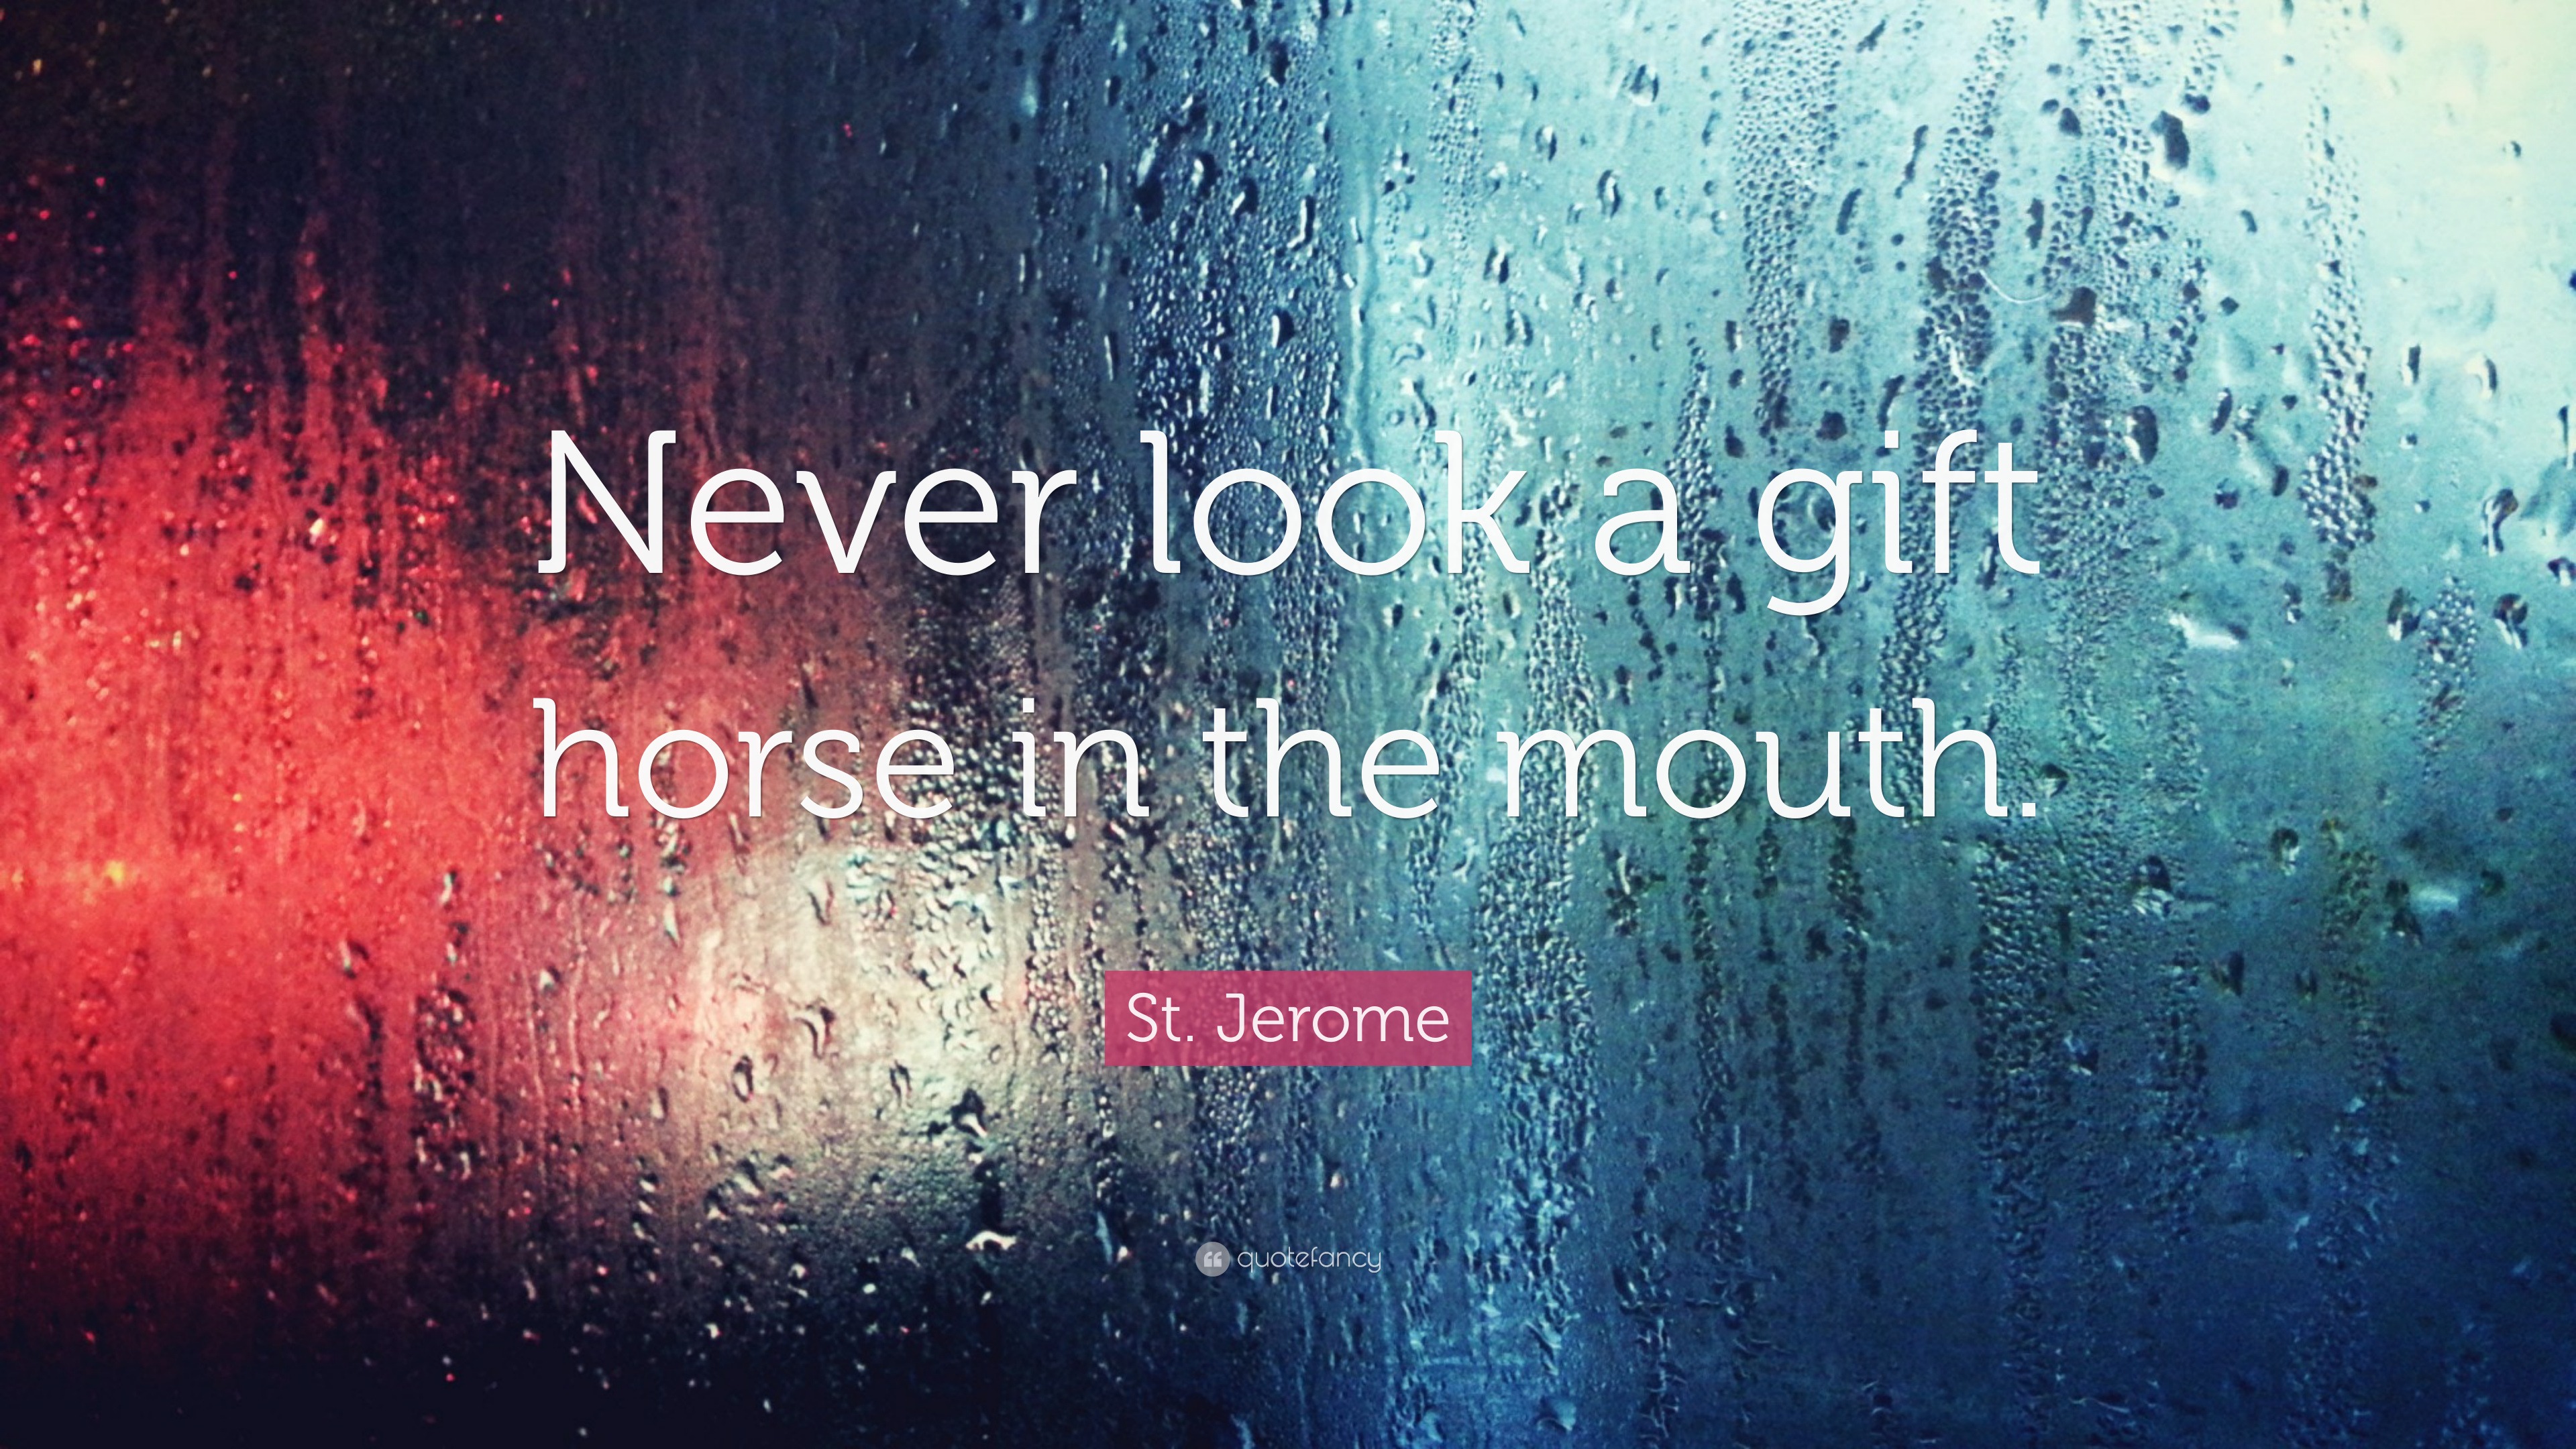 At Work, Always Look a Gift Horse in the Mouth” - Sklover Working Wisdom